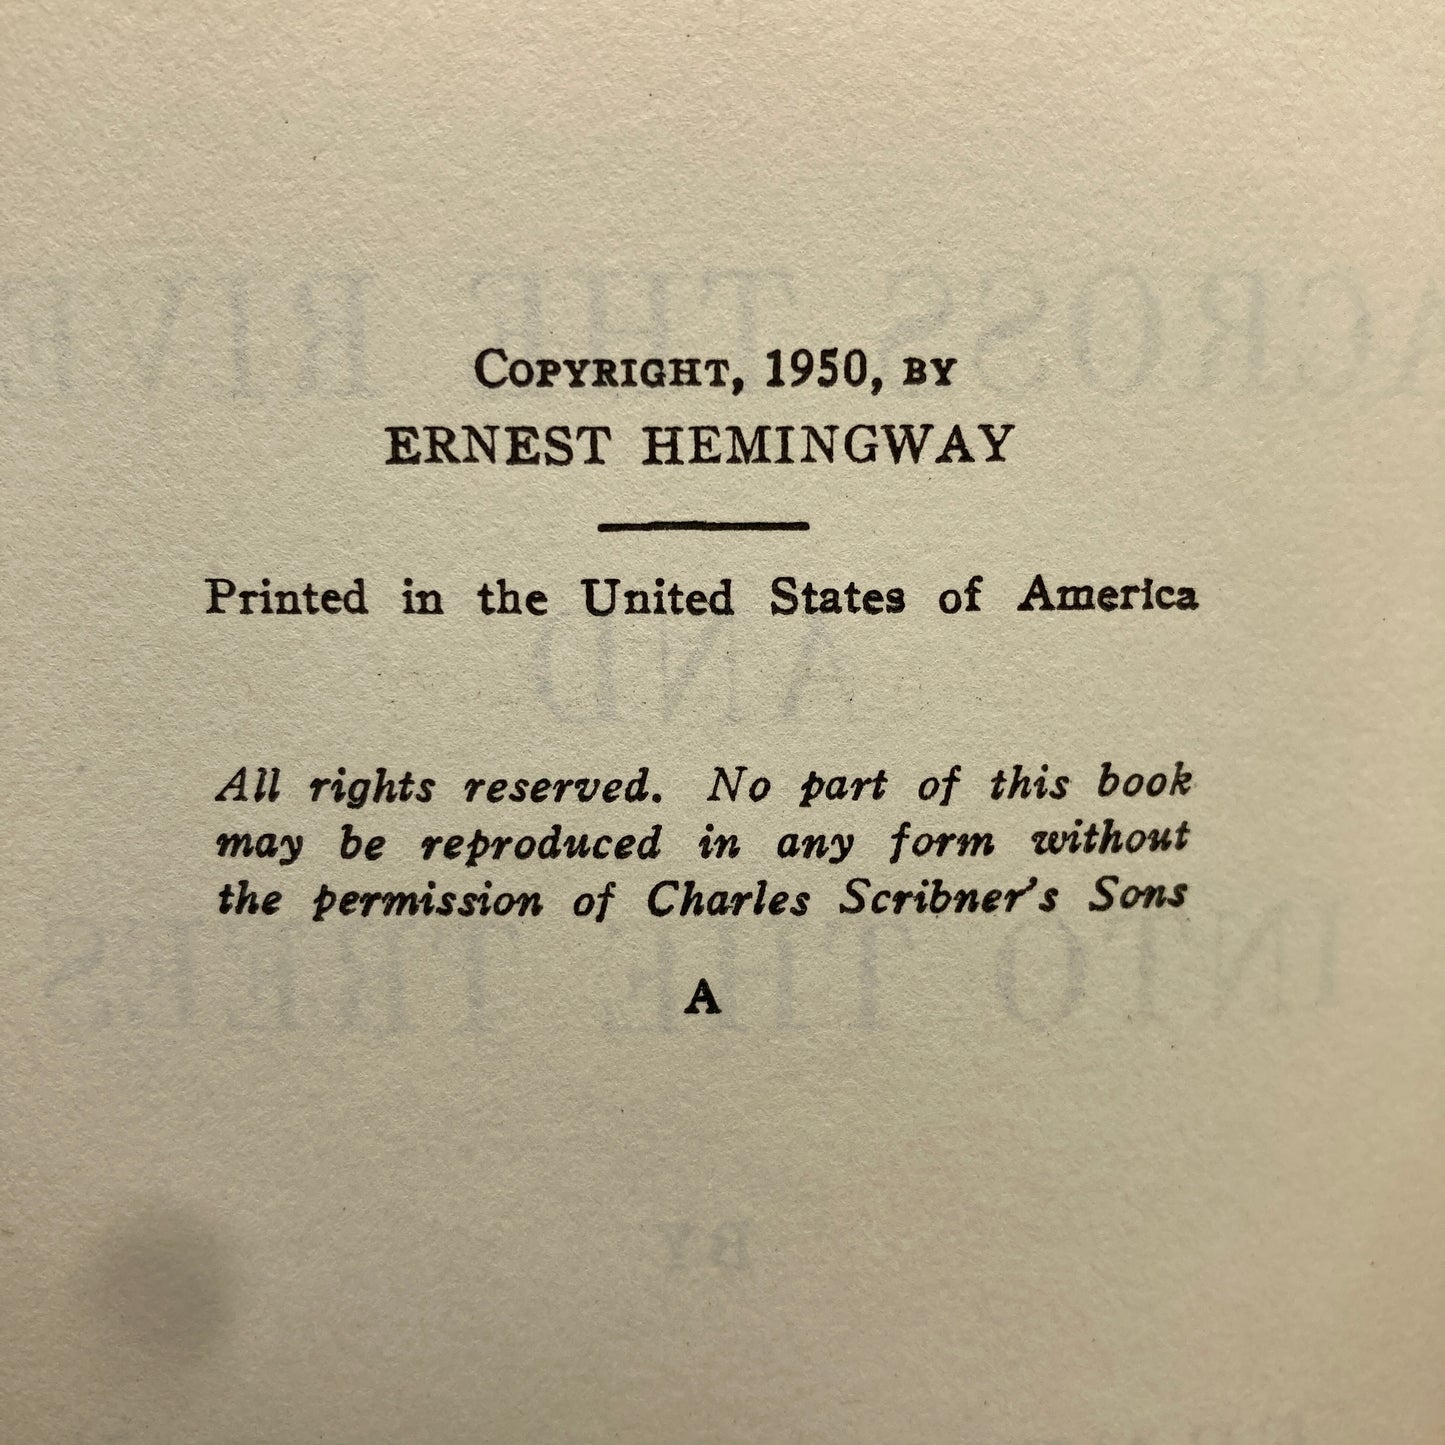 HEMINGWAY, Ernest "Across the River and Into the Trees" [Scribners, 1950] 1st Edition